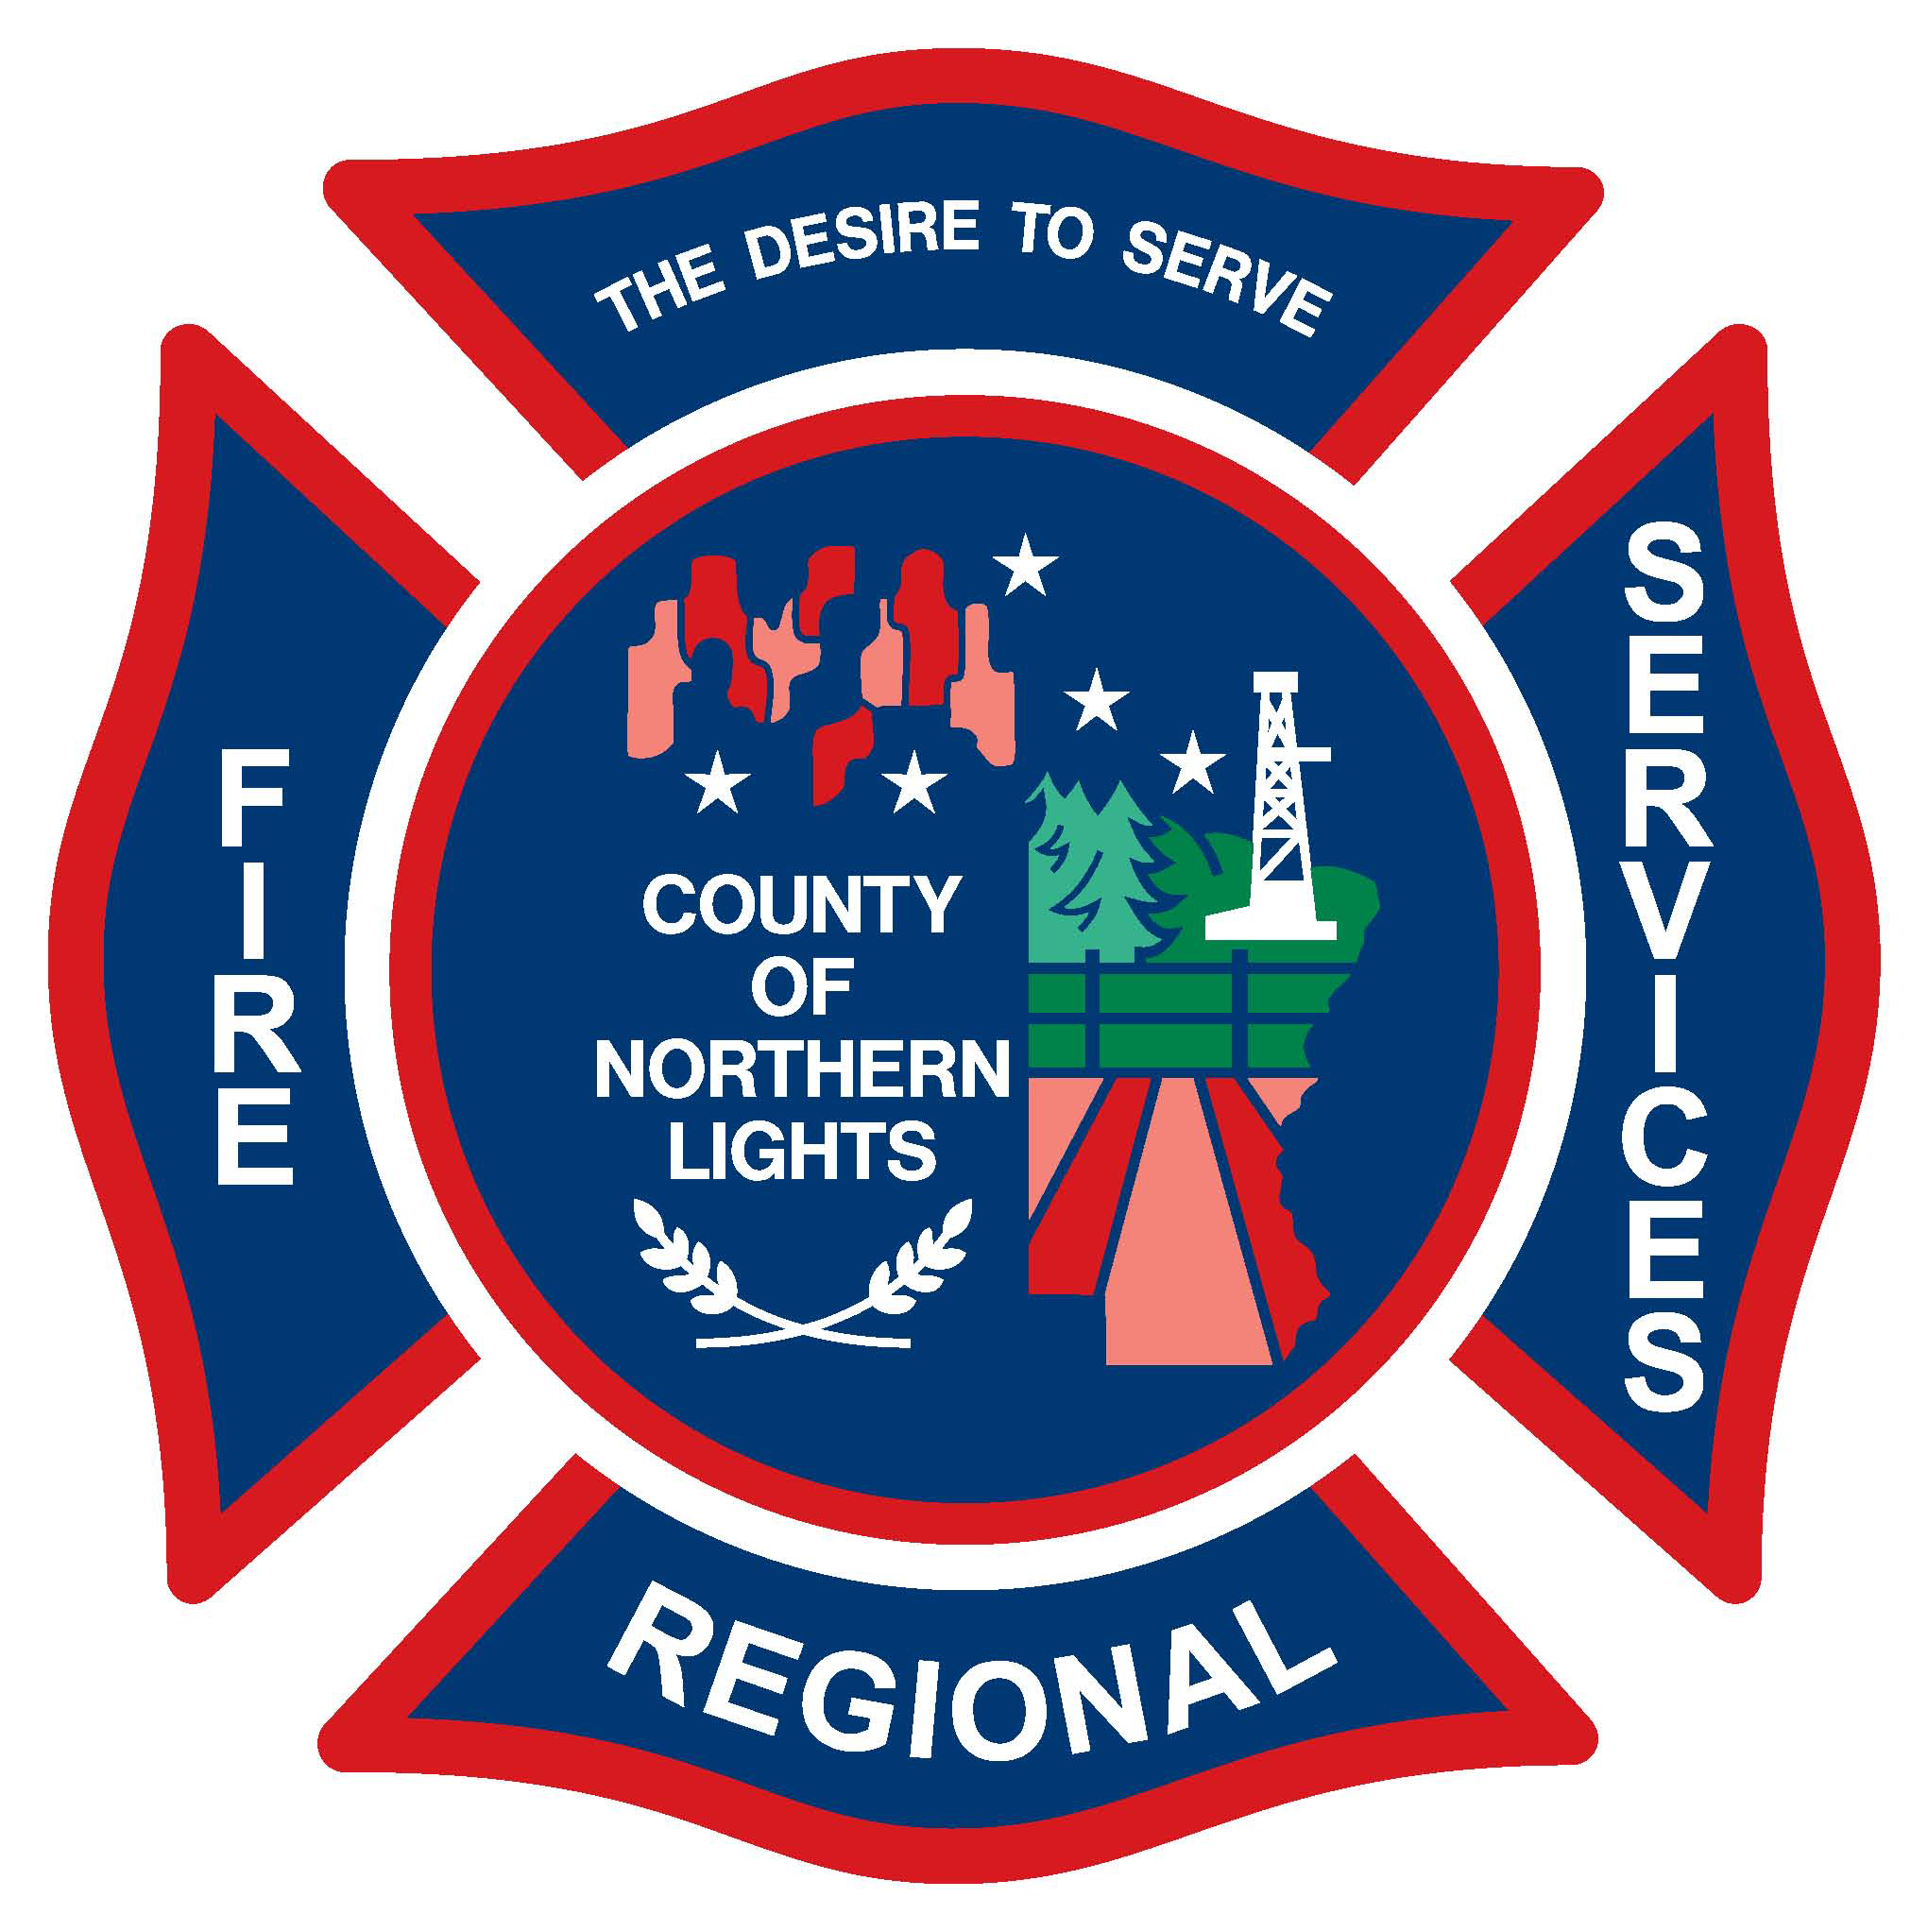 County of Northern Lights Regional Fire Services Crest